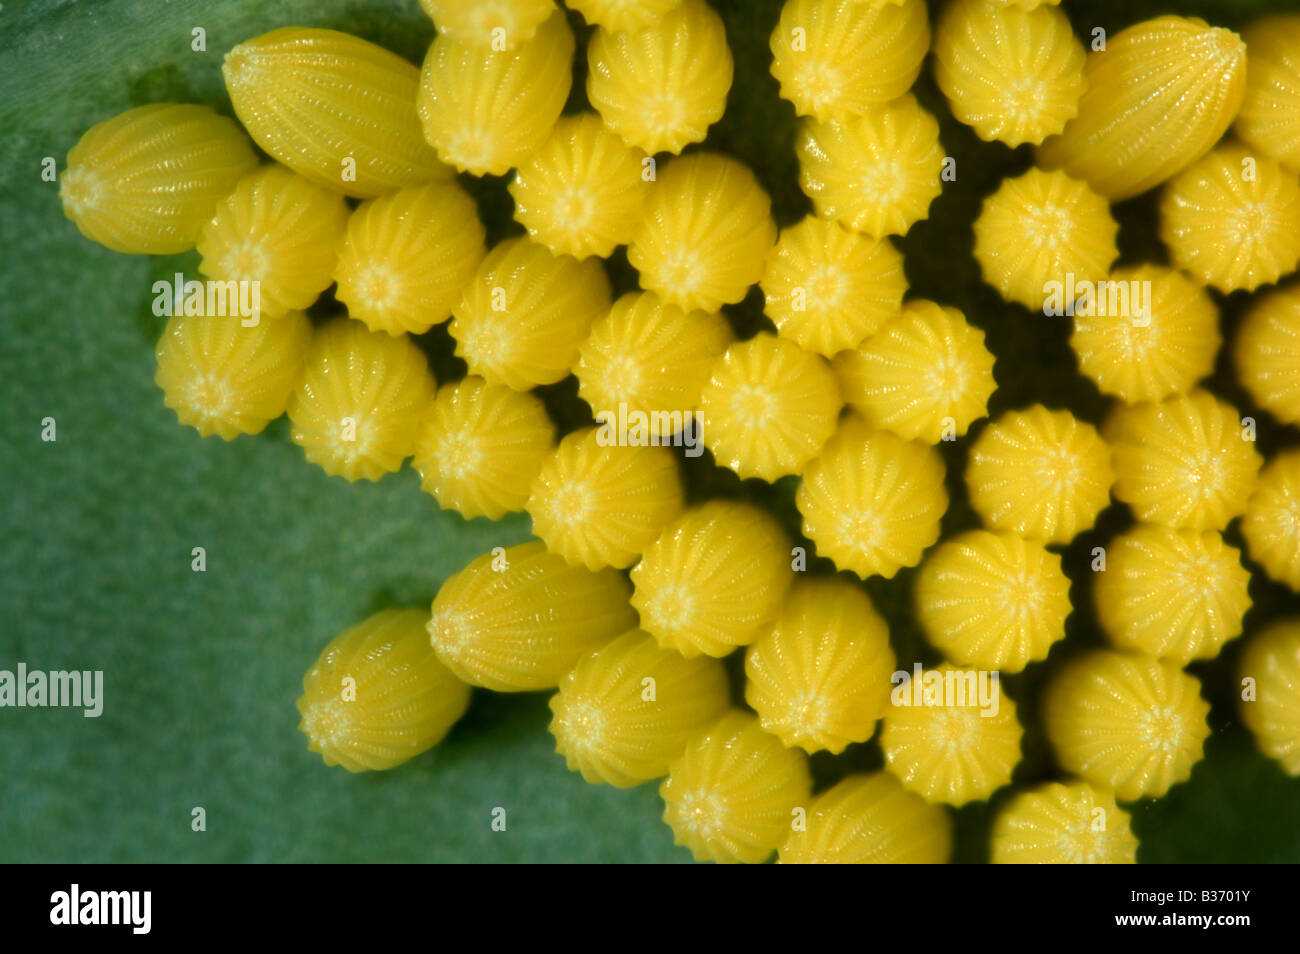 Cabbage white butterfly Pieris brassicae eggs on a cabbage leaf Stock Photo